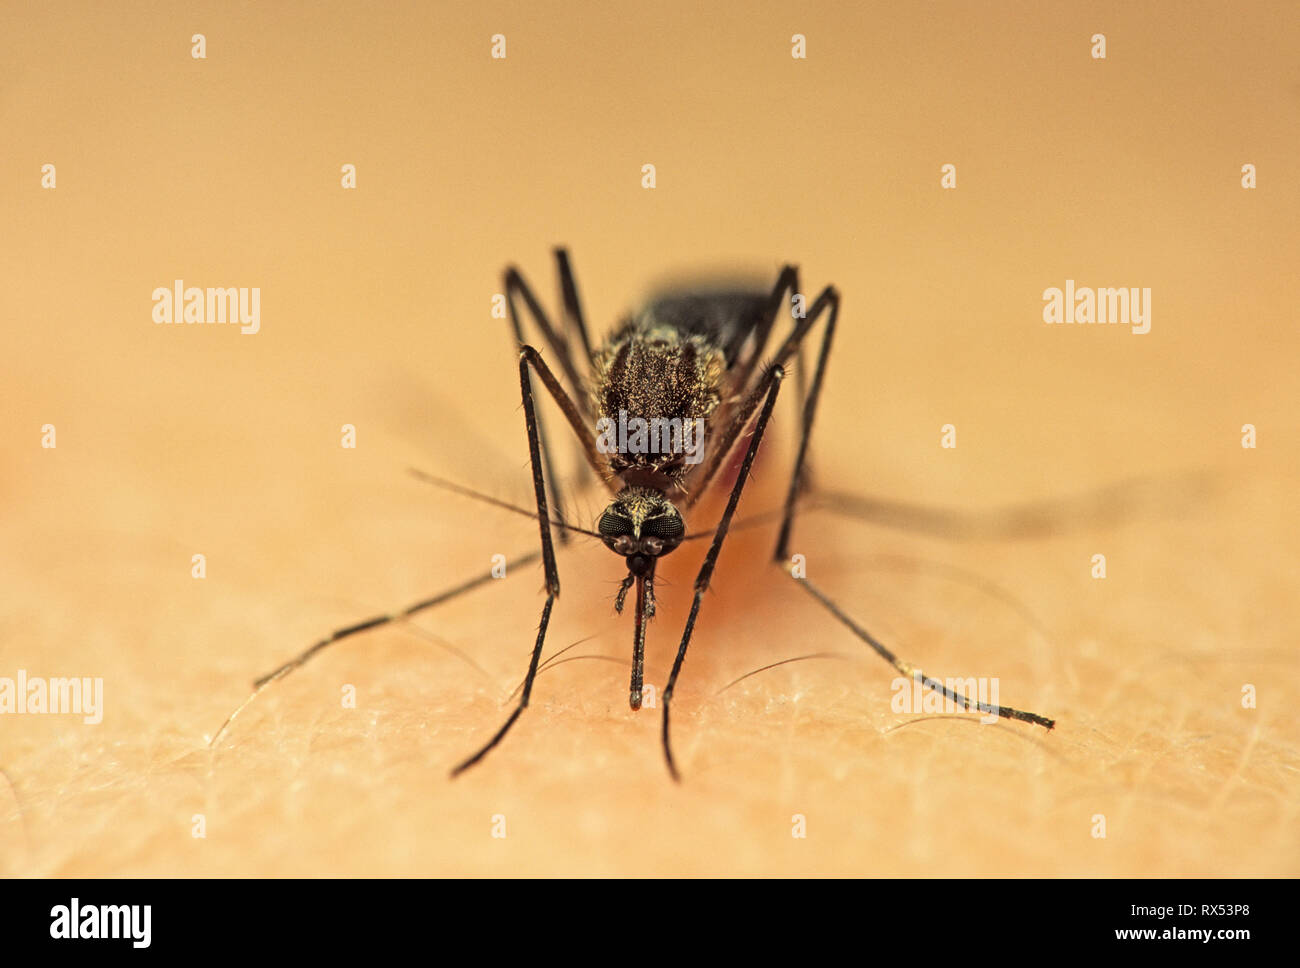 Mosquito, Aedes sp., head on, showing mouthparts, preparing to feed on human, Saskatchewan, Canada Stock Photo